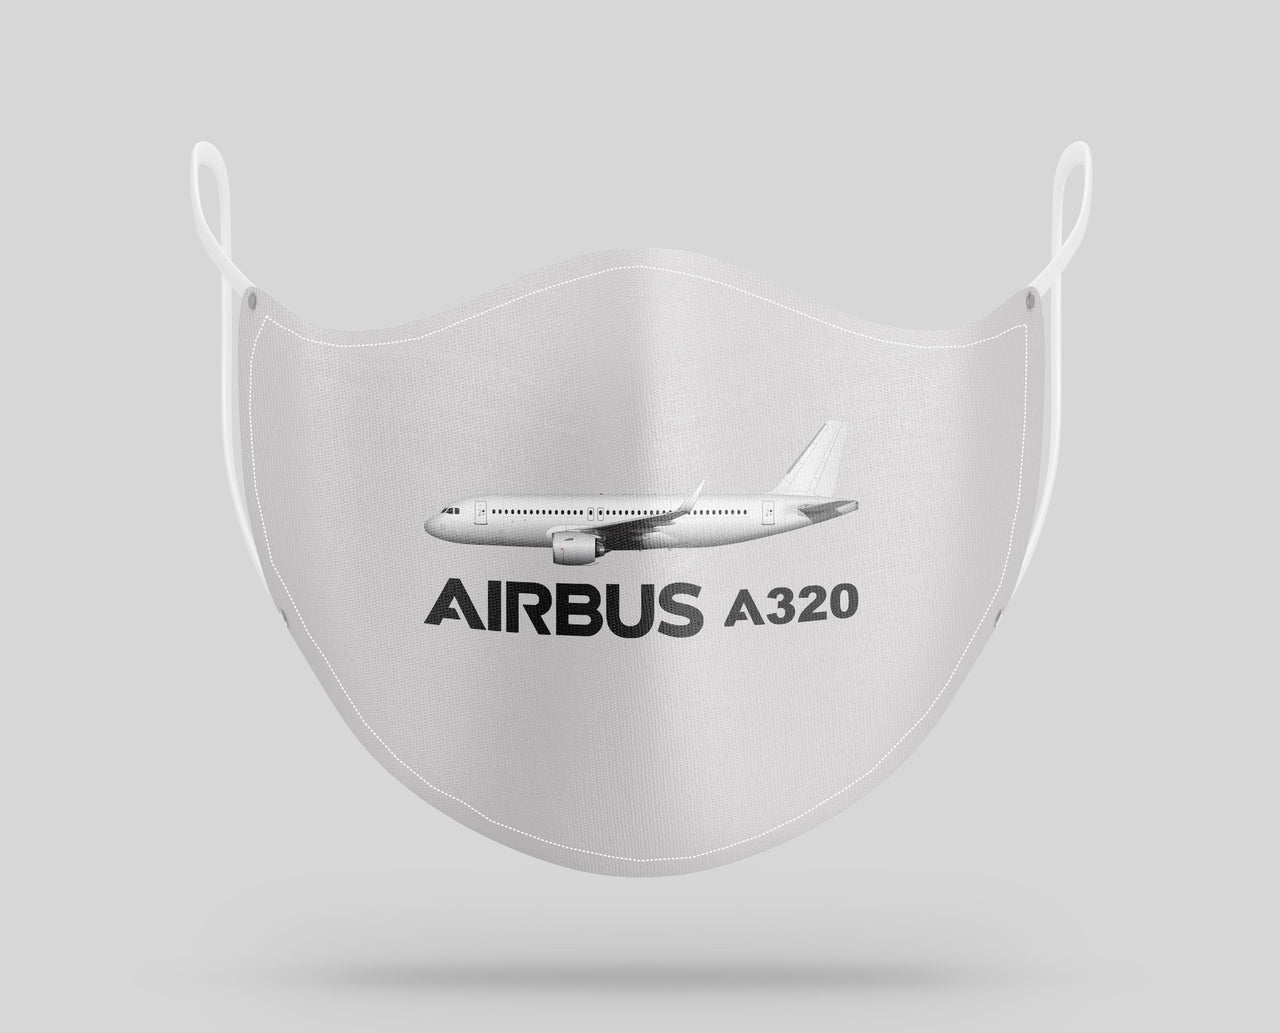 The Airbus A320 Designed Face Masks